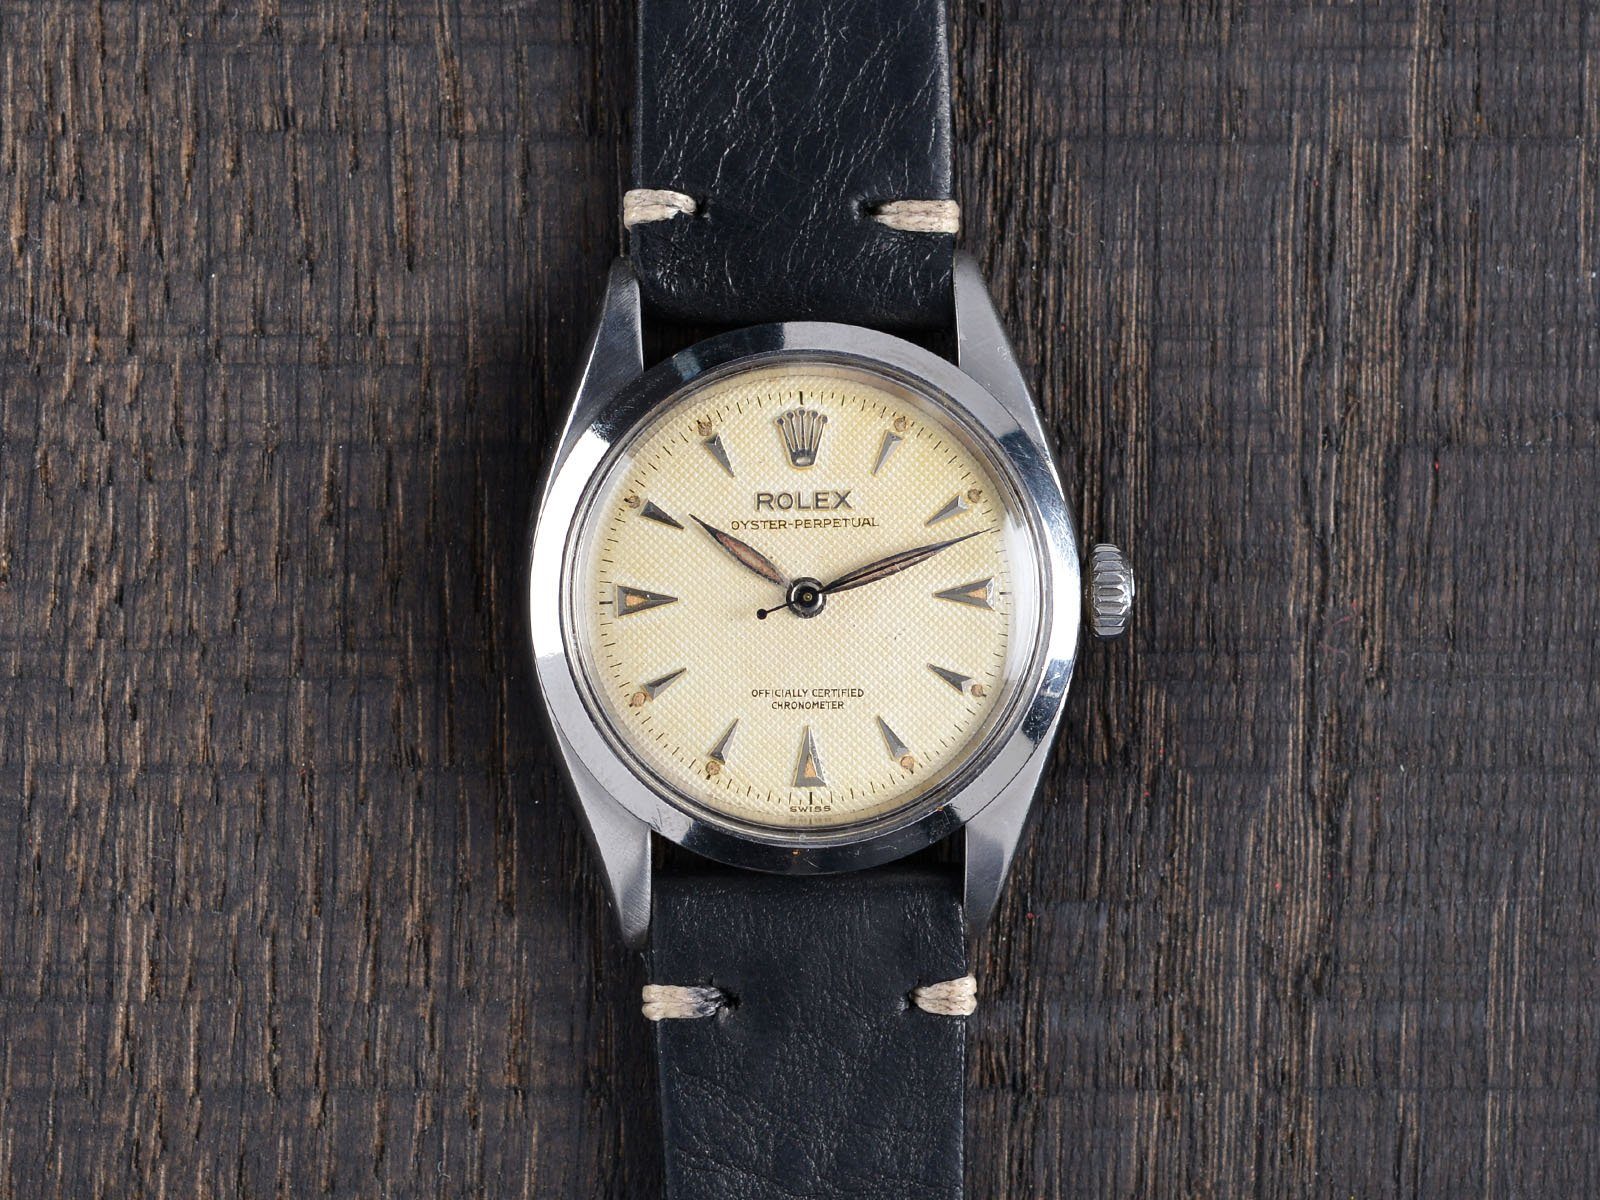 ROLEX 6850 OYSTER PERPETUAL WAFFLE DIAL